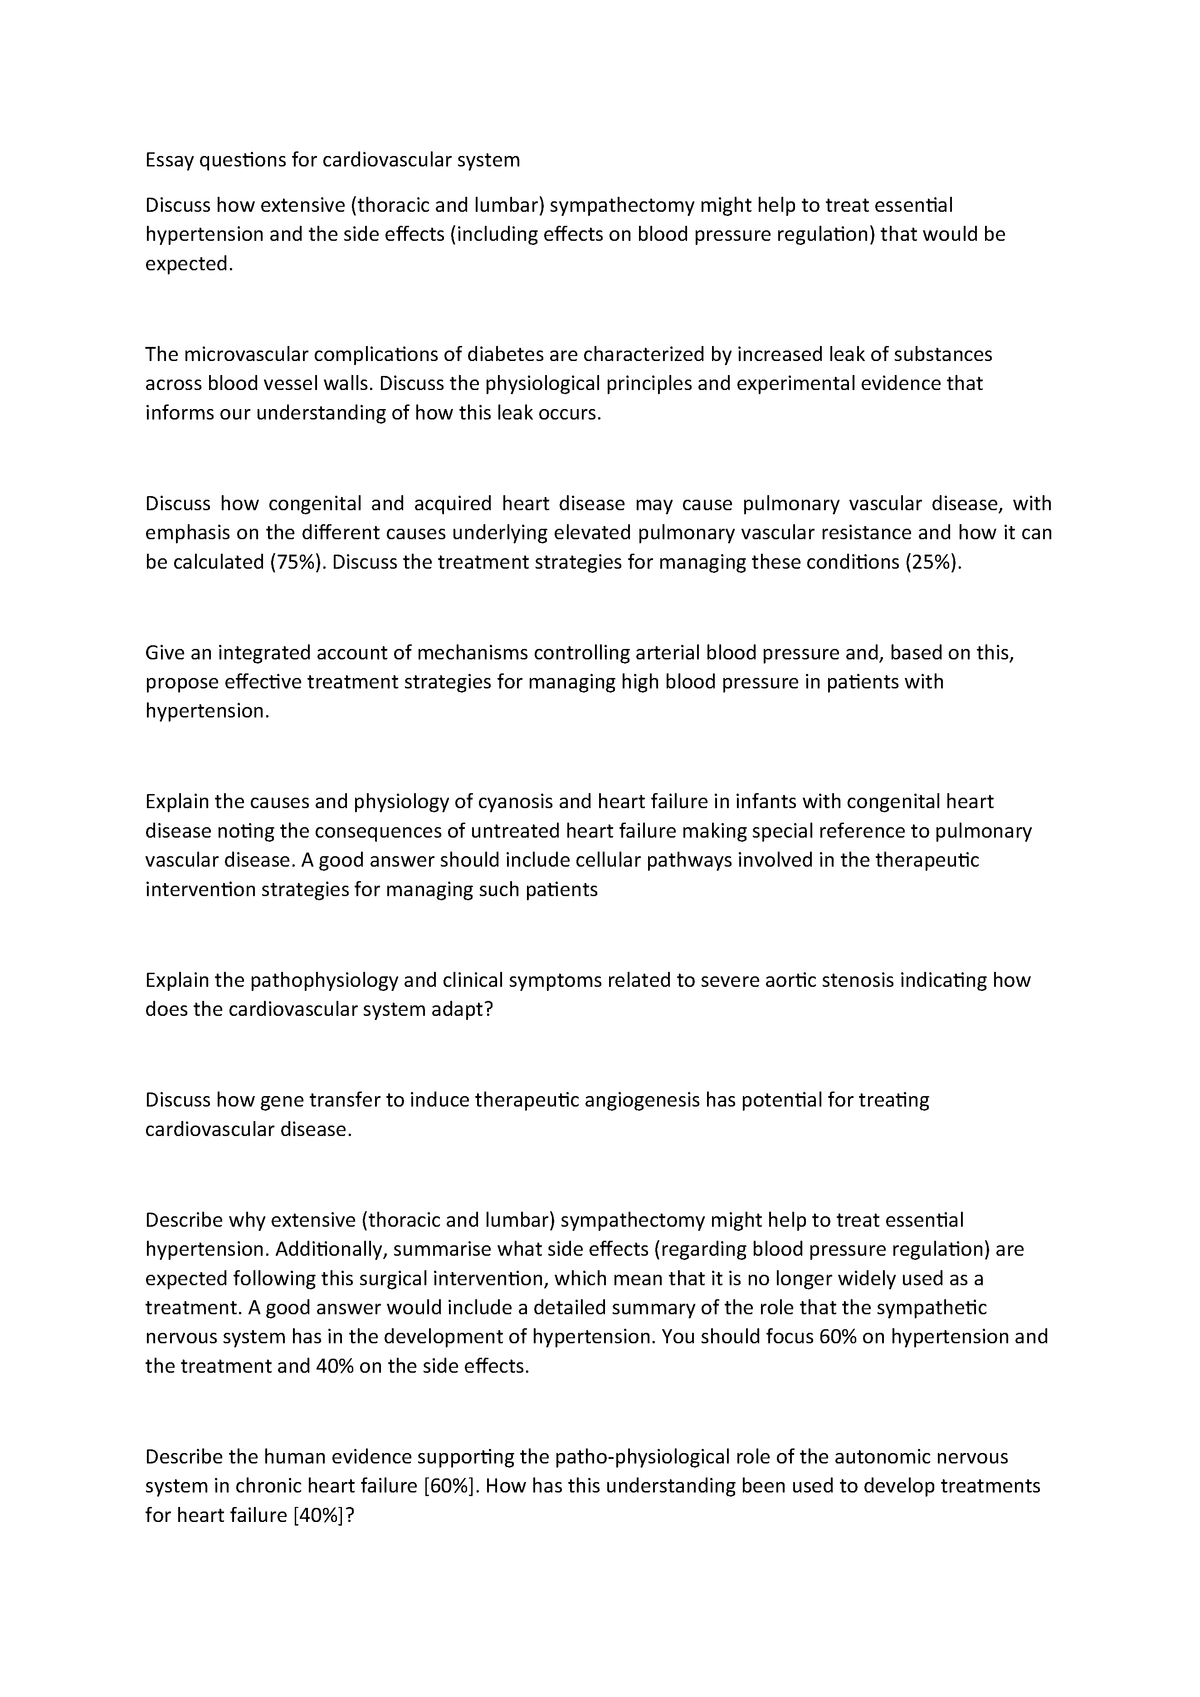 Essay about advice